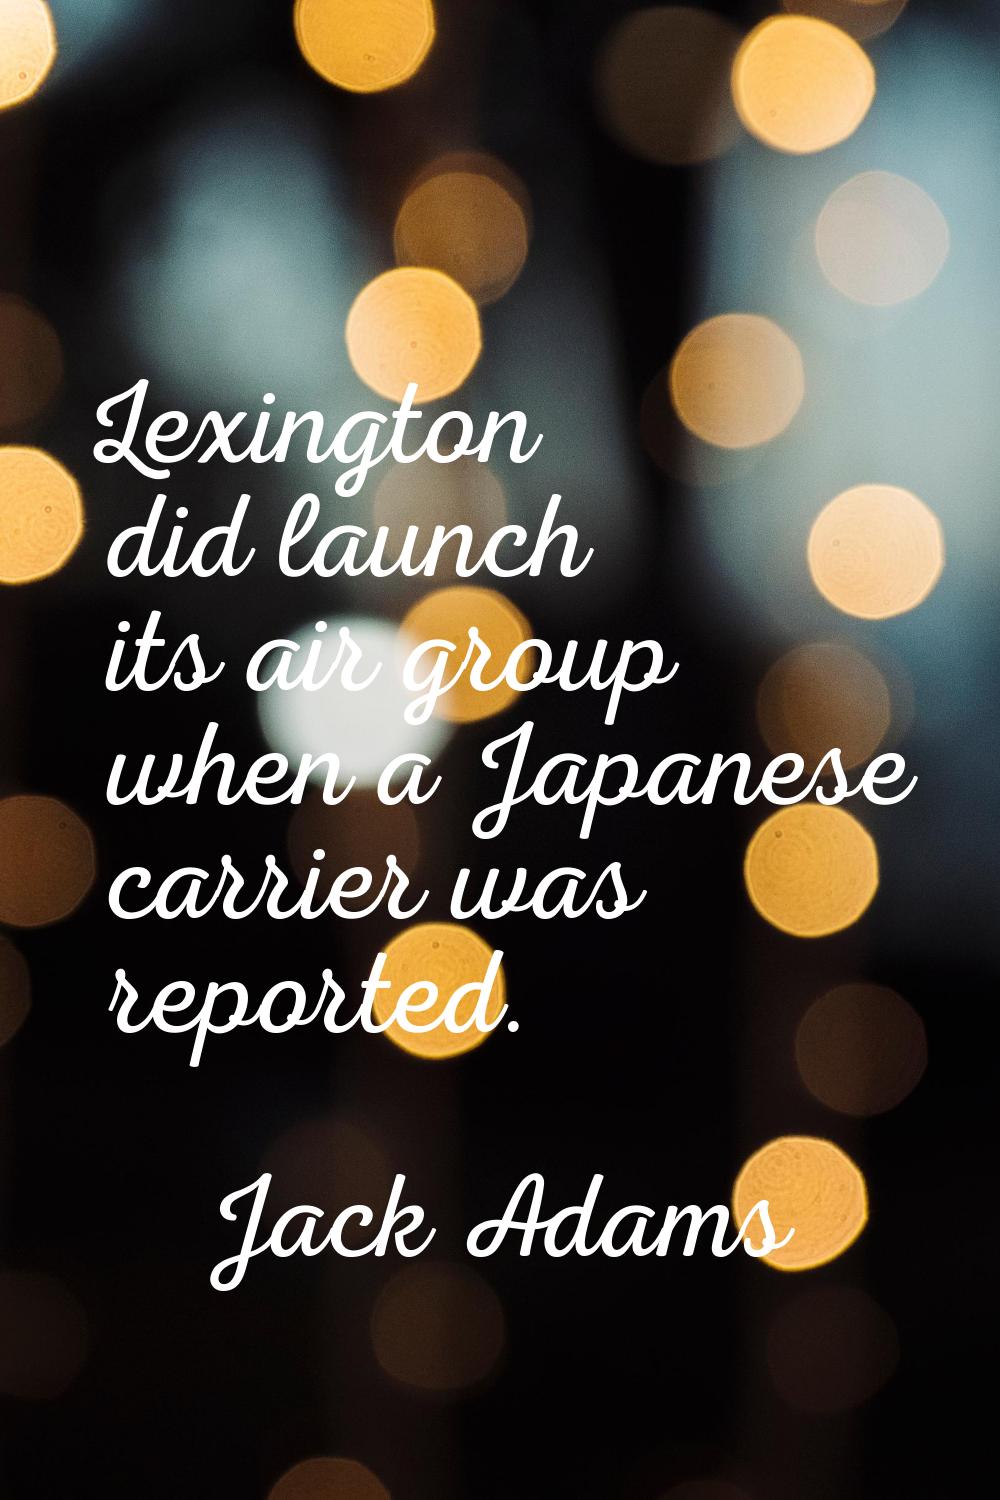 Lexington did launch its air group when a Japanese carrier was reported.